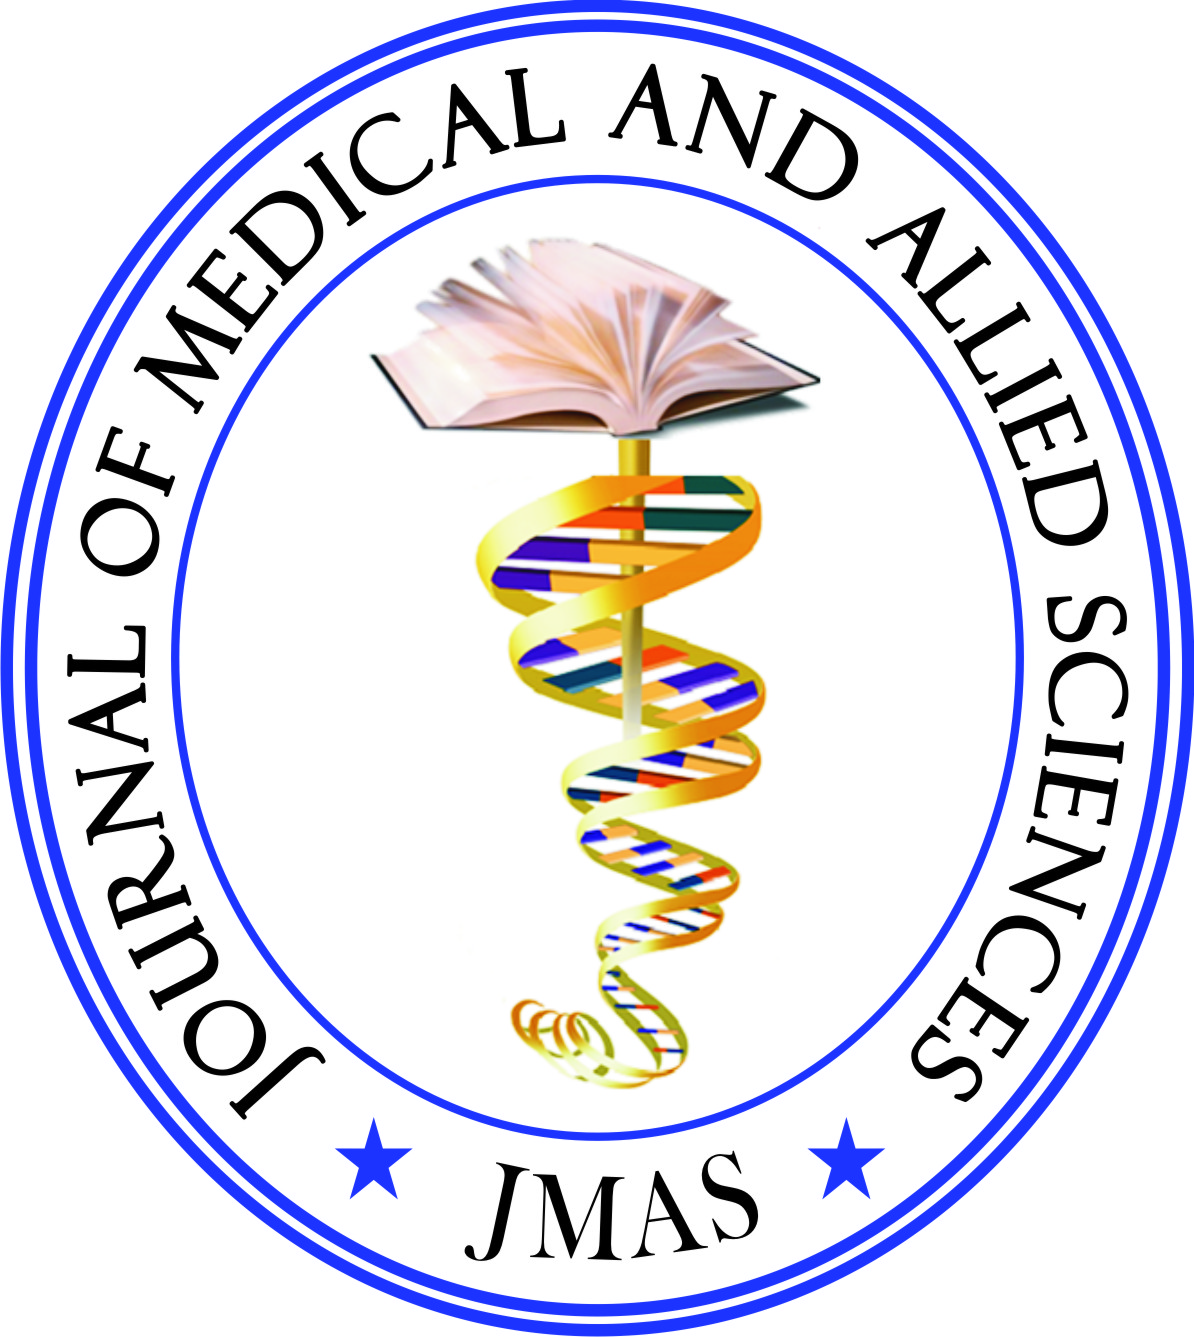 Journal of Medical and Allied Sciences